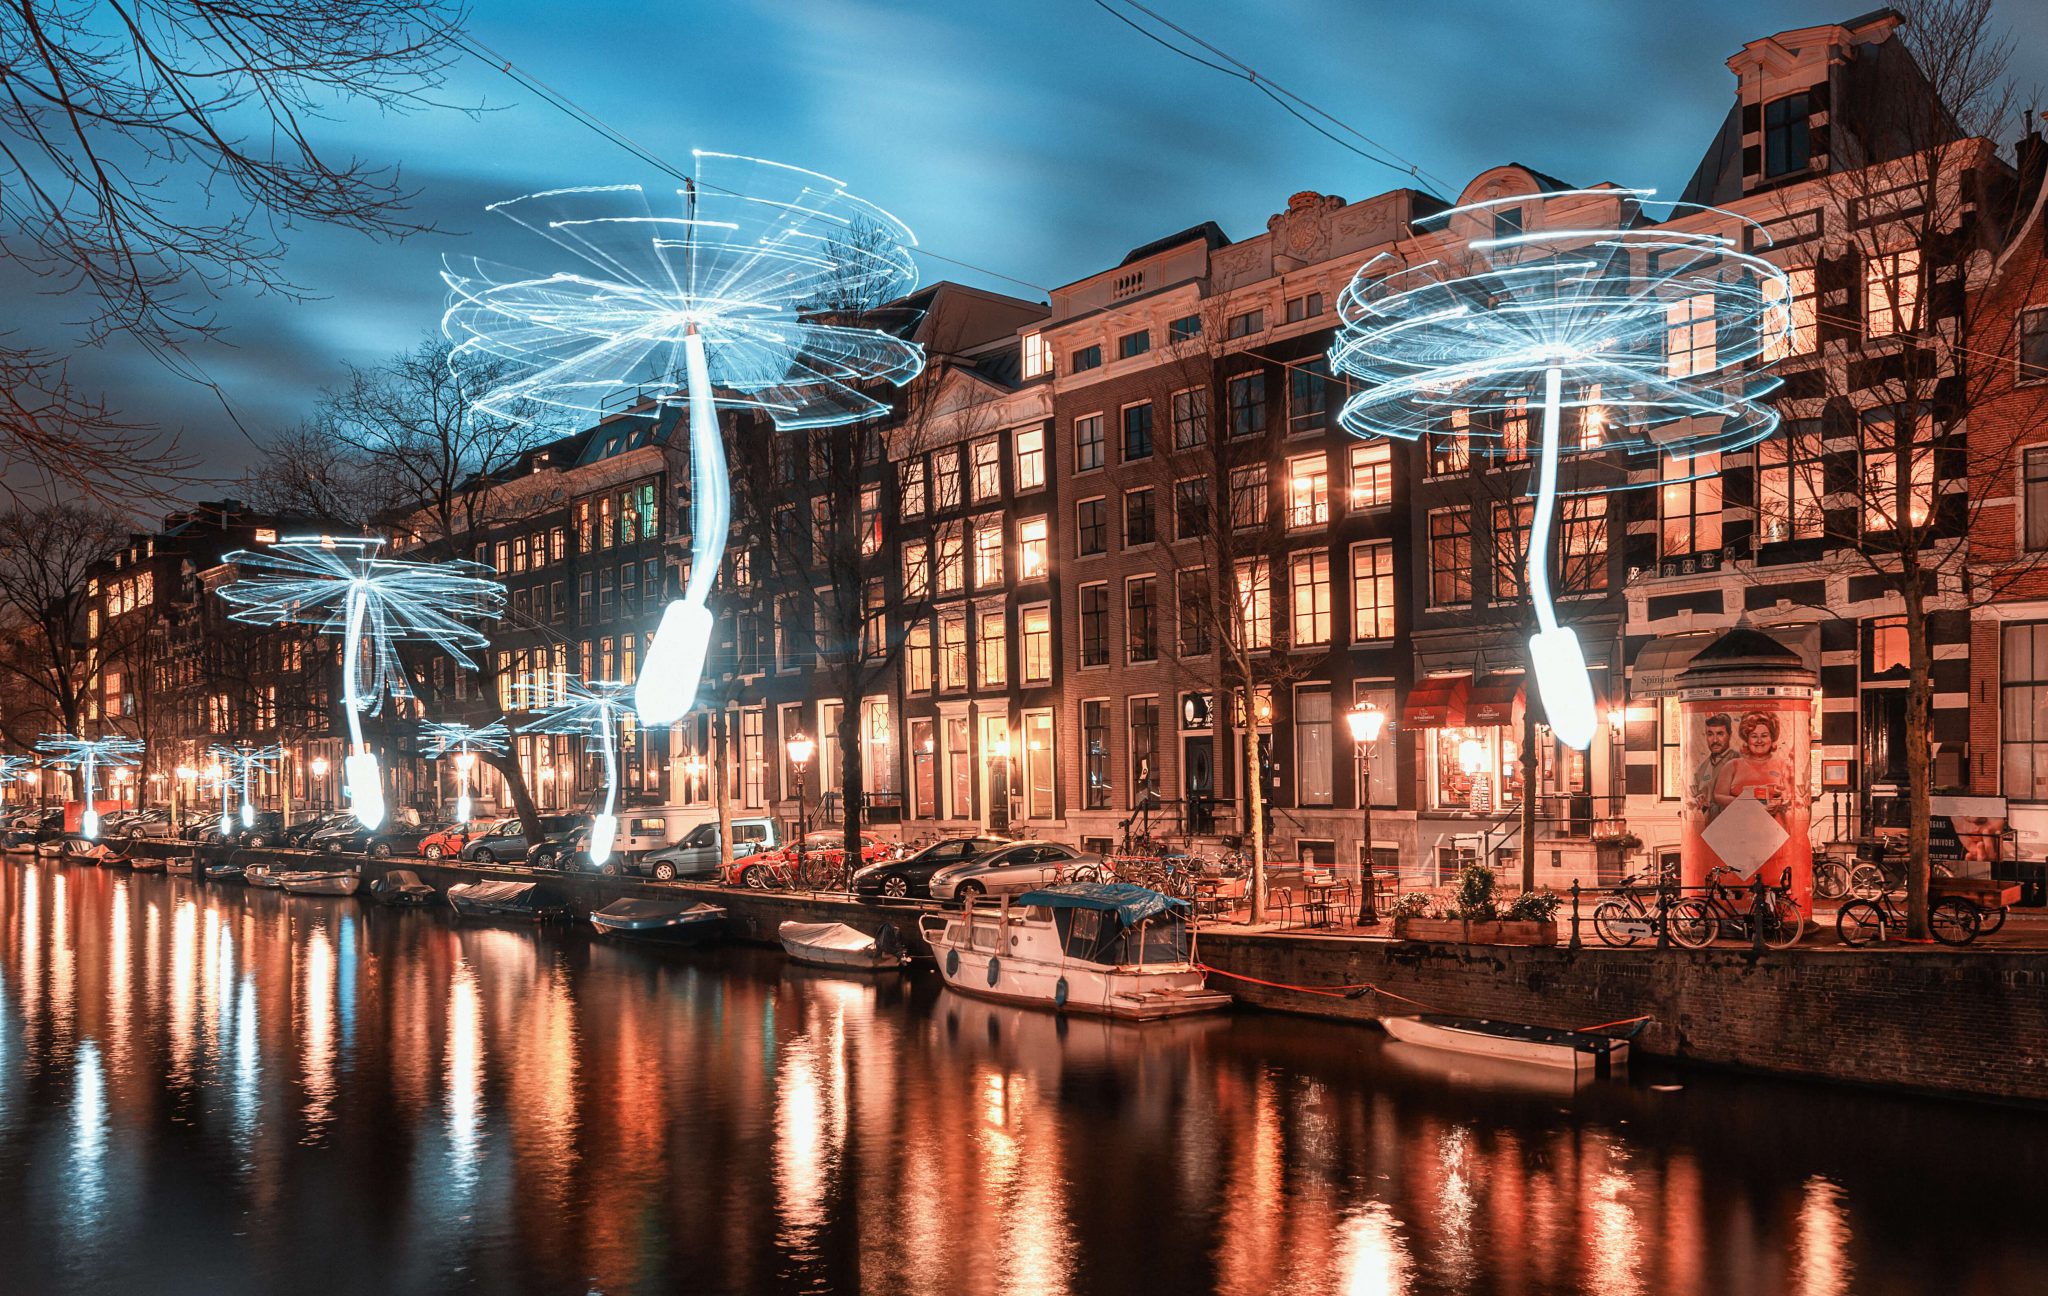 Amsterdam, Netherlands offers its Light Festival from November to January yearly